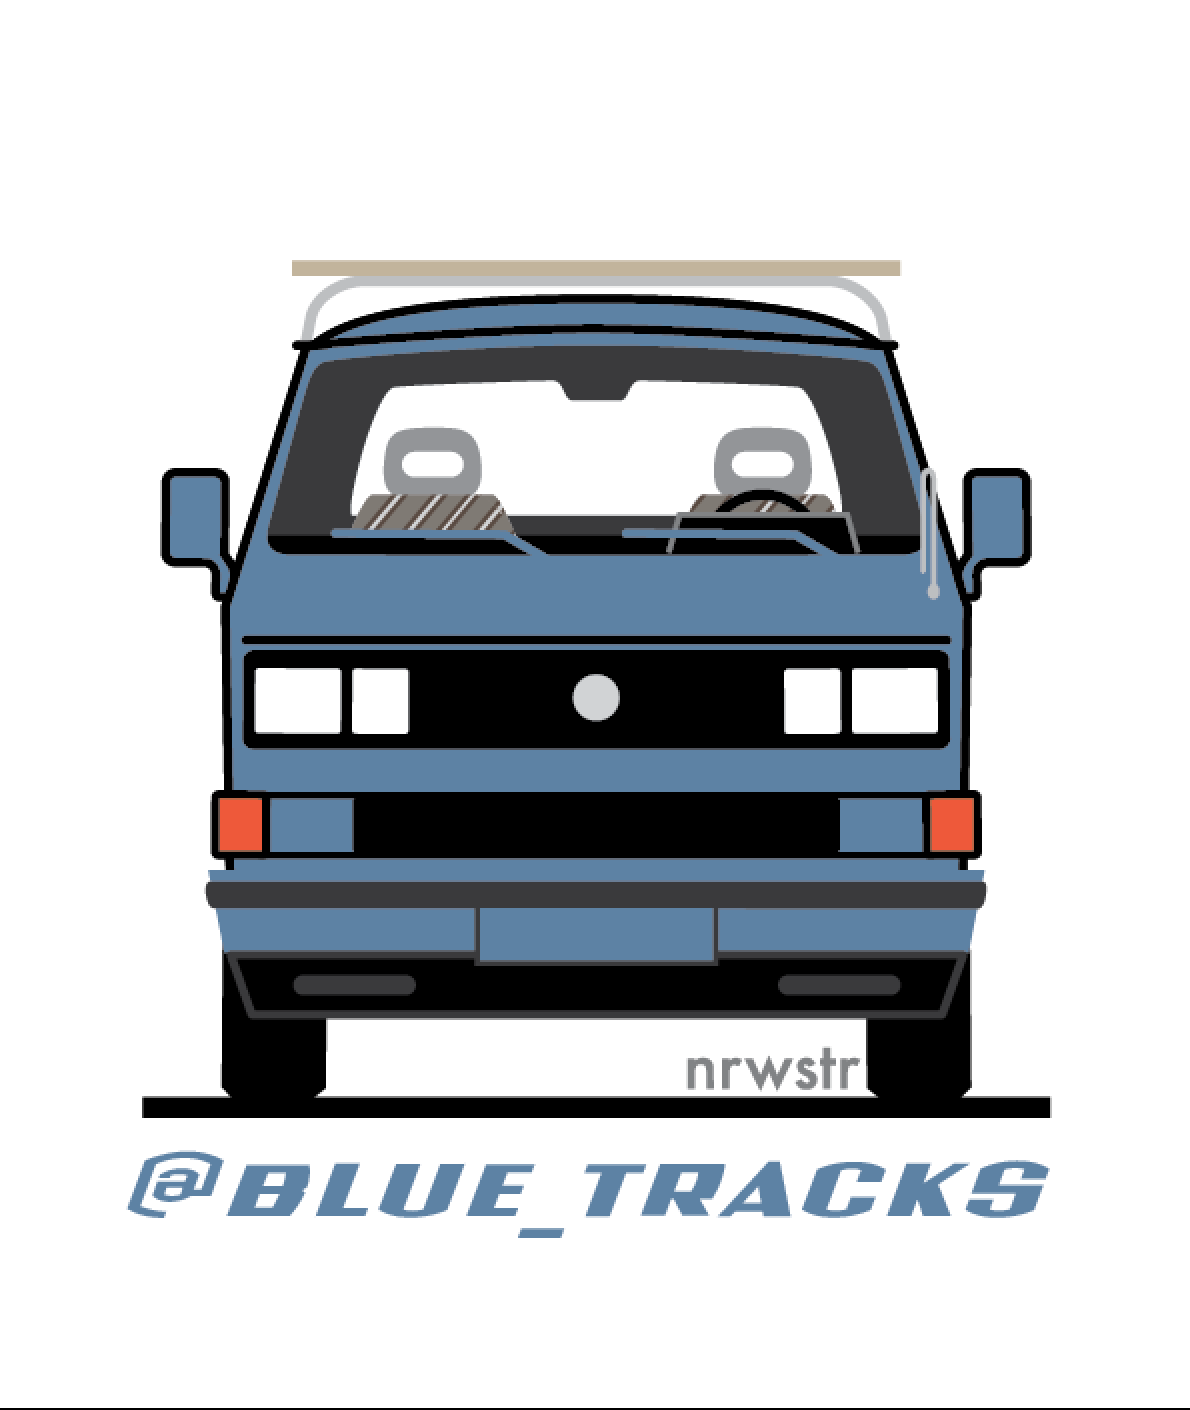 comm-blue_tracks front view.png